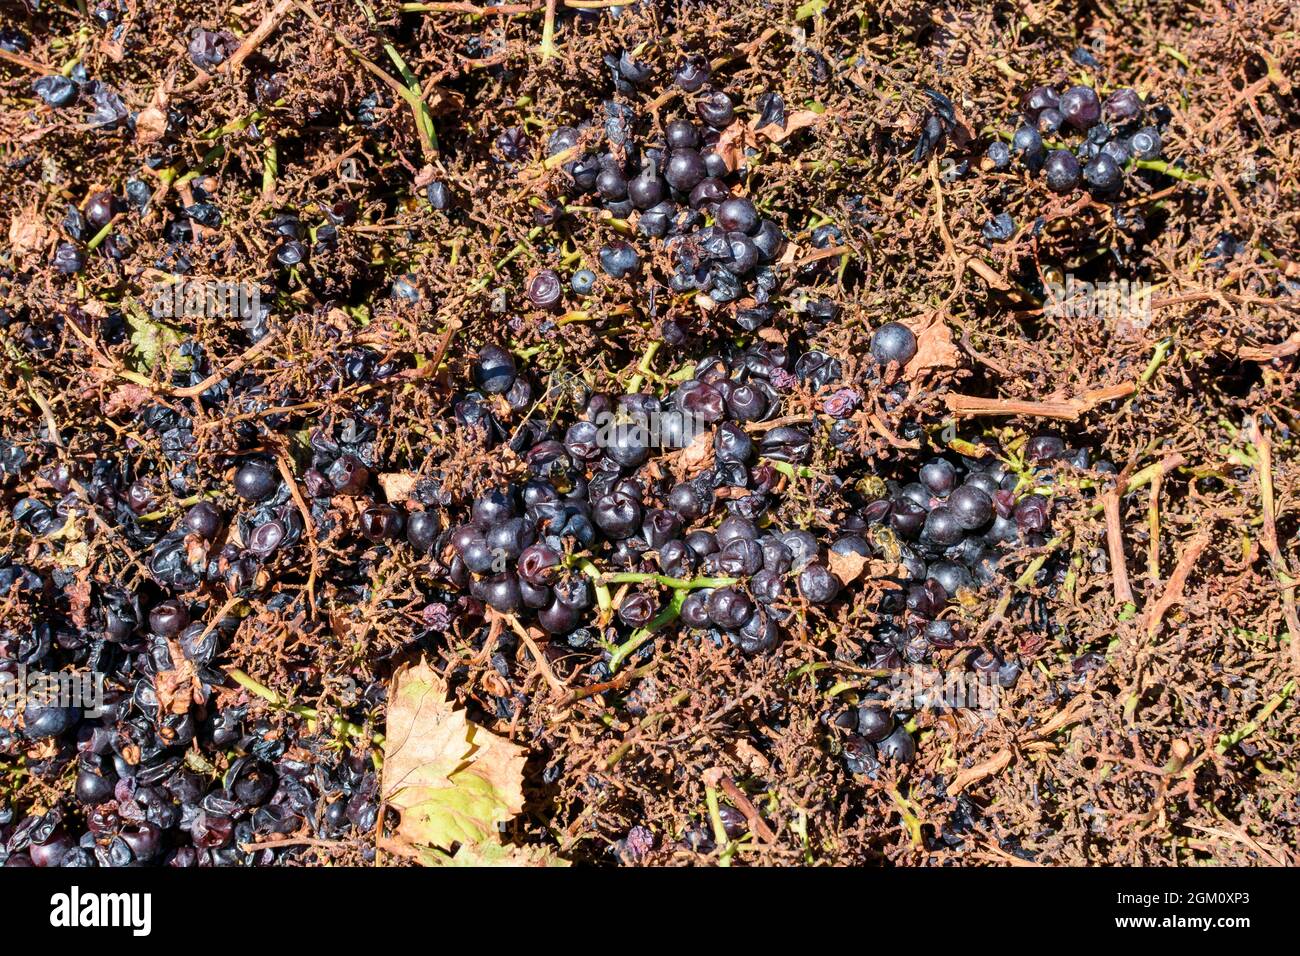 Grape pomace - the solid remains of grapes after pressing for juice and ...